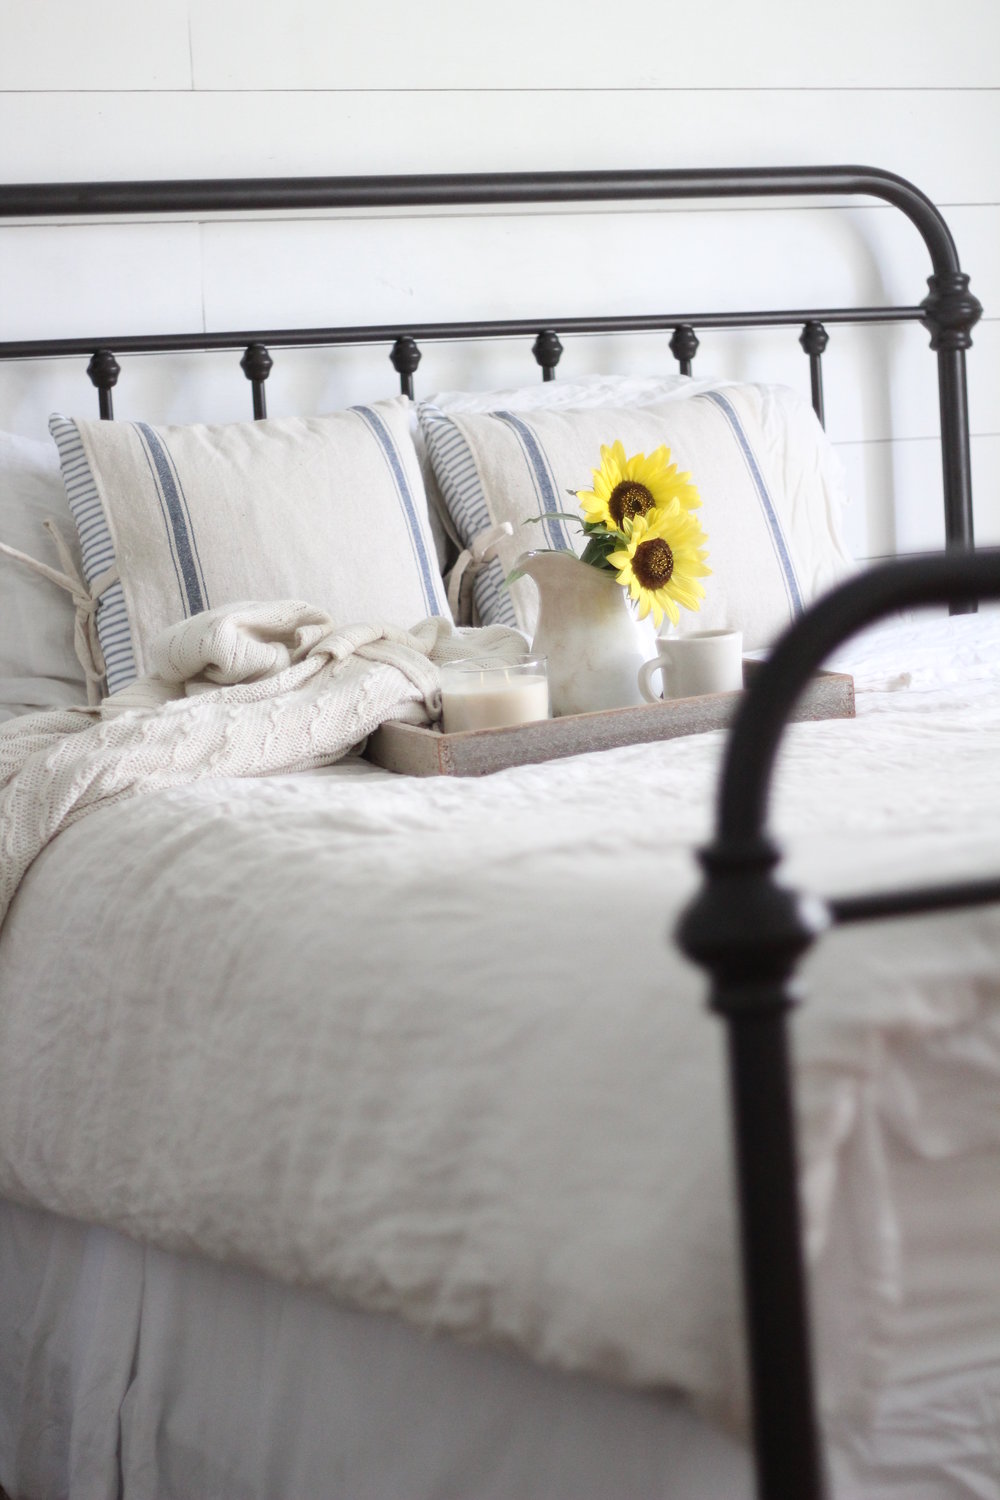 iron bed with linen bedding and a serving tray with a vase of flowers